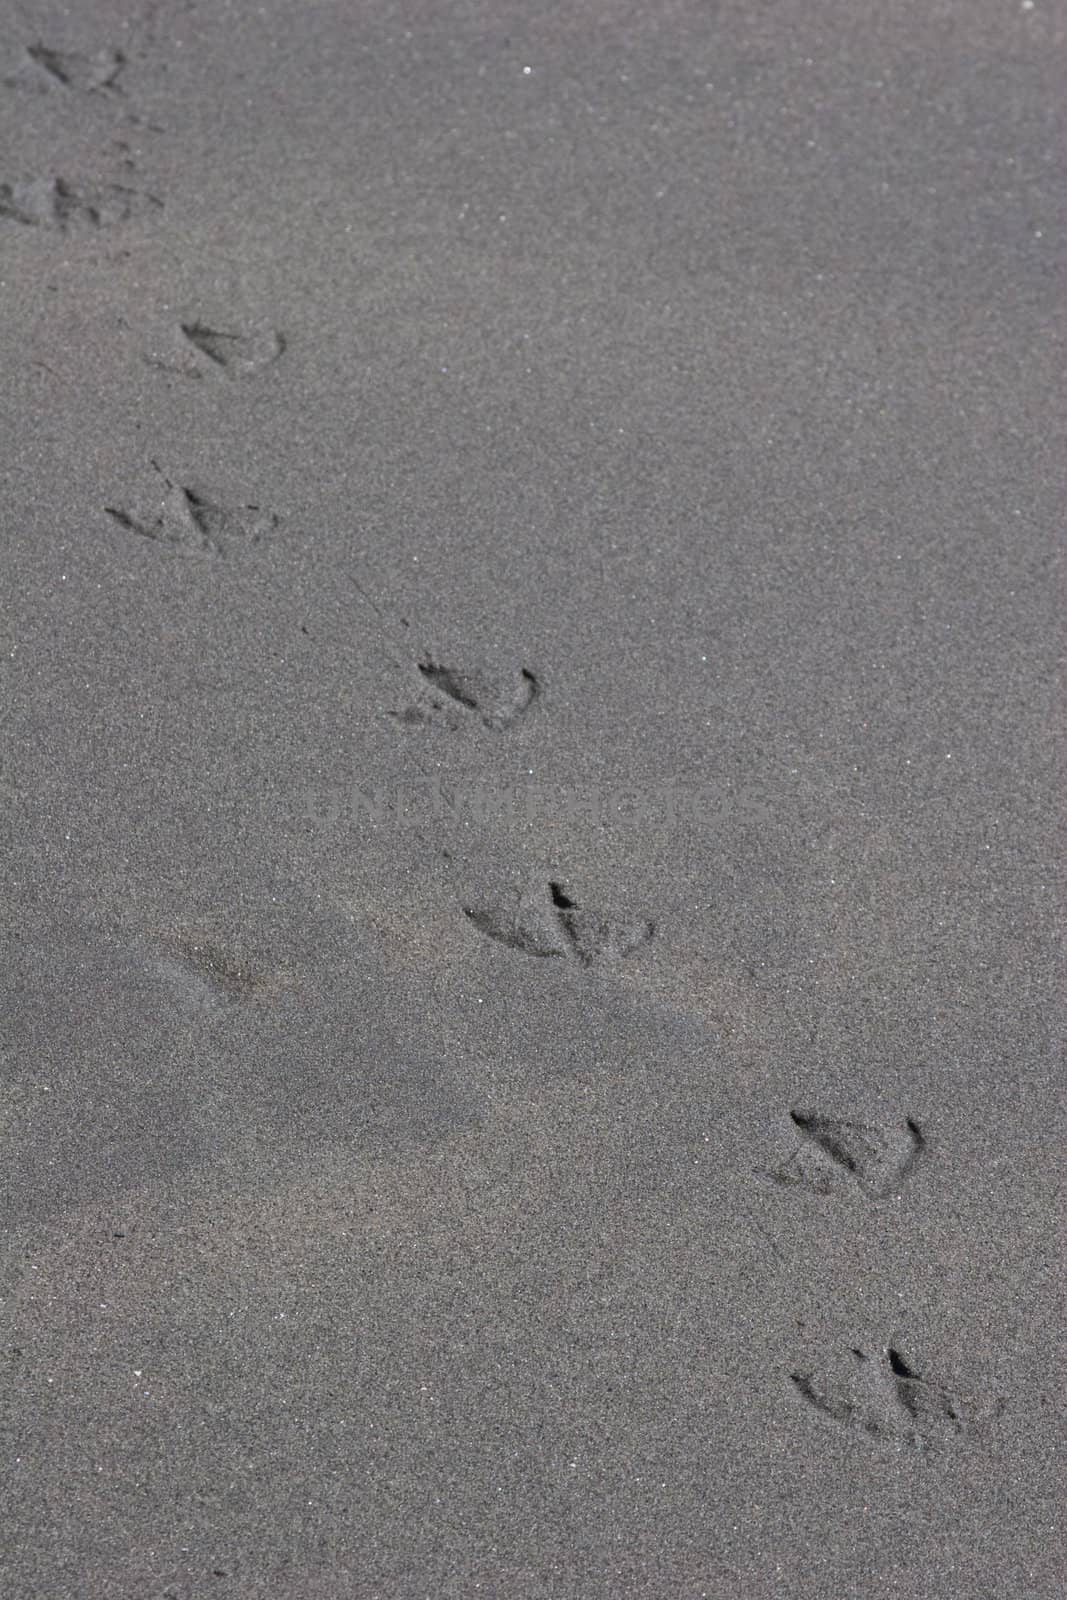 A close-up of bird prints in sand.